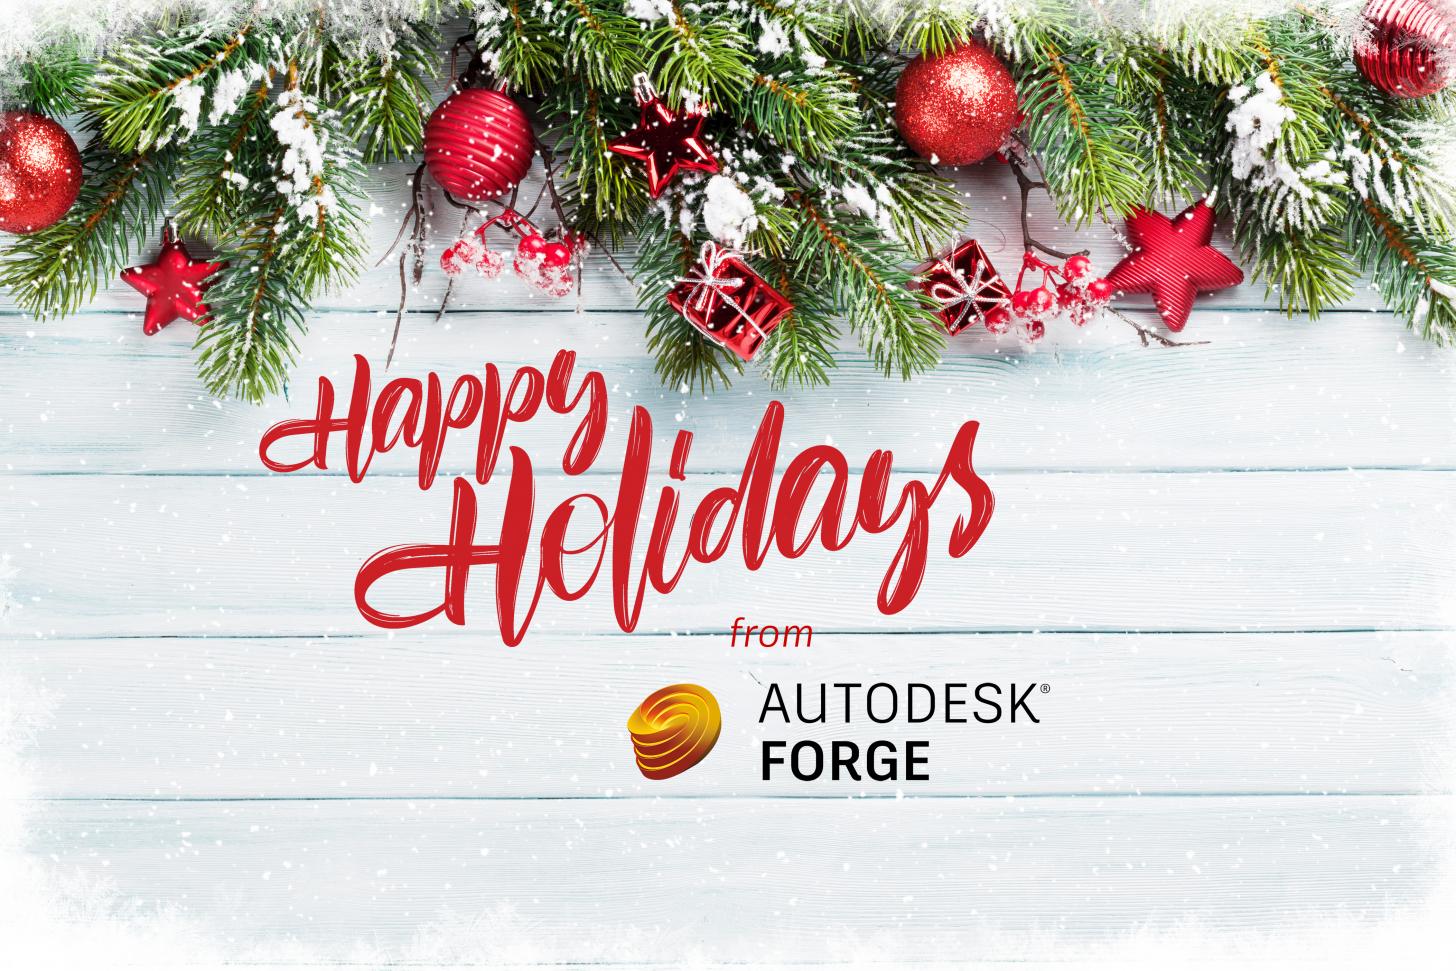 Happy holidays from Forge!